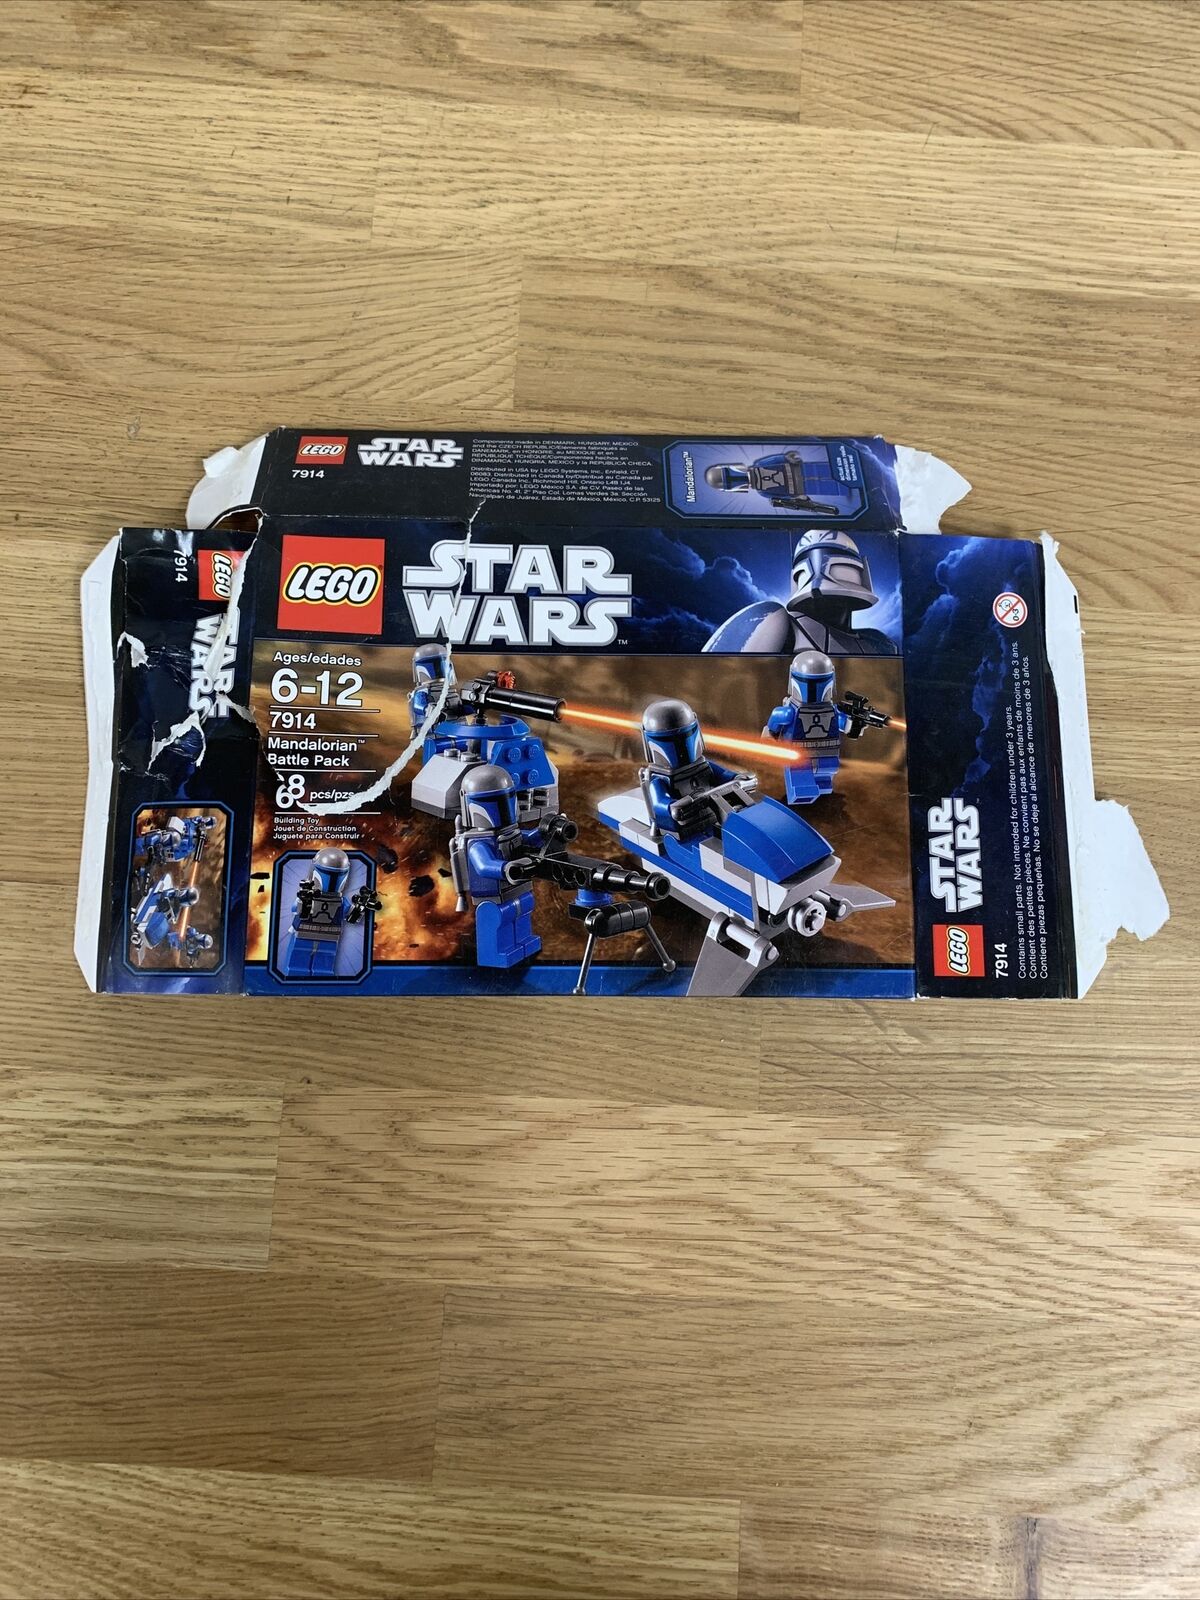 Lego Star Wars - 7914 - Box ONLY - No Pieces Included